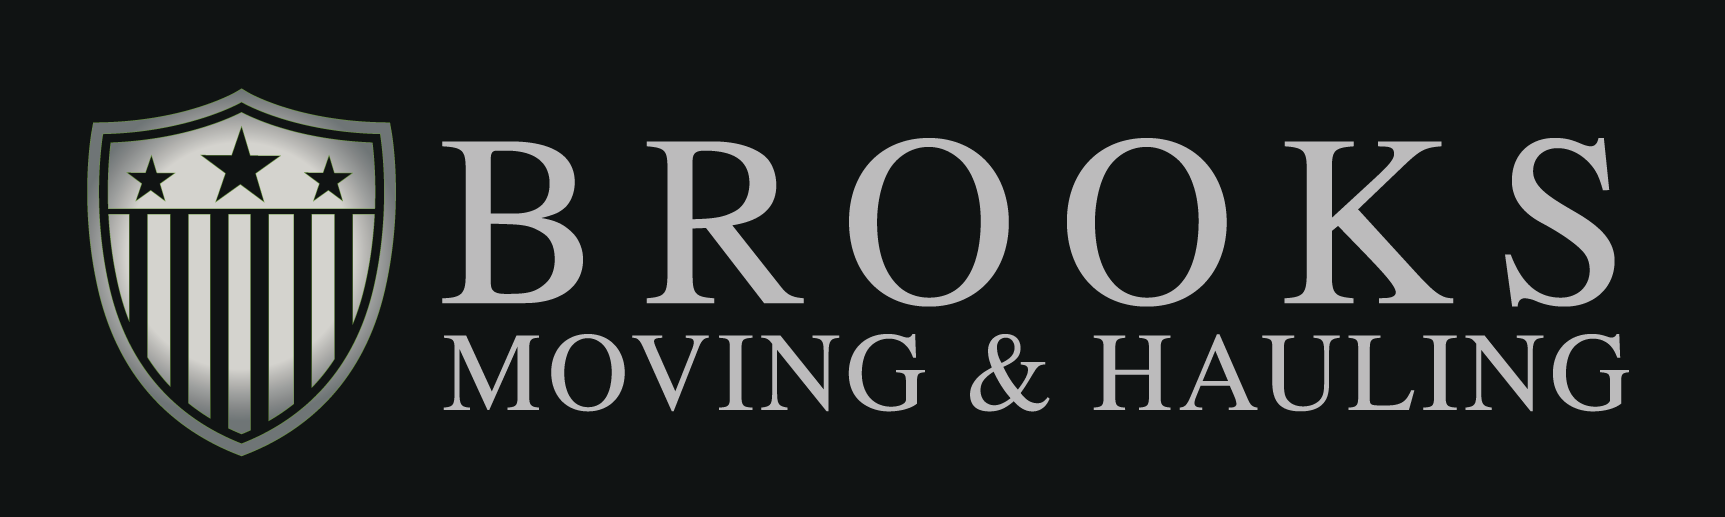 Brooks Moving & Hauling Asserts Its Offering of Reliable Moving Services